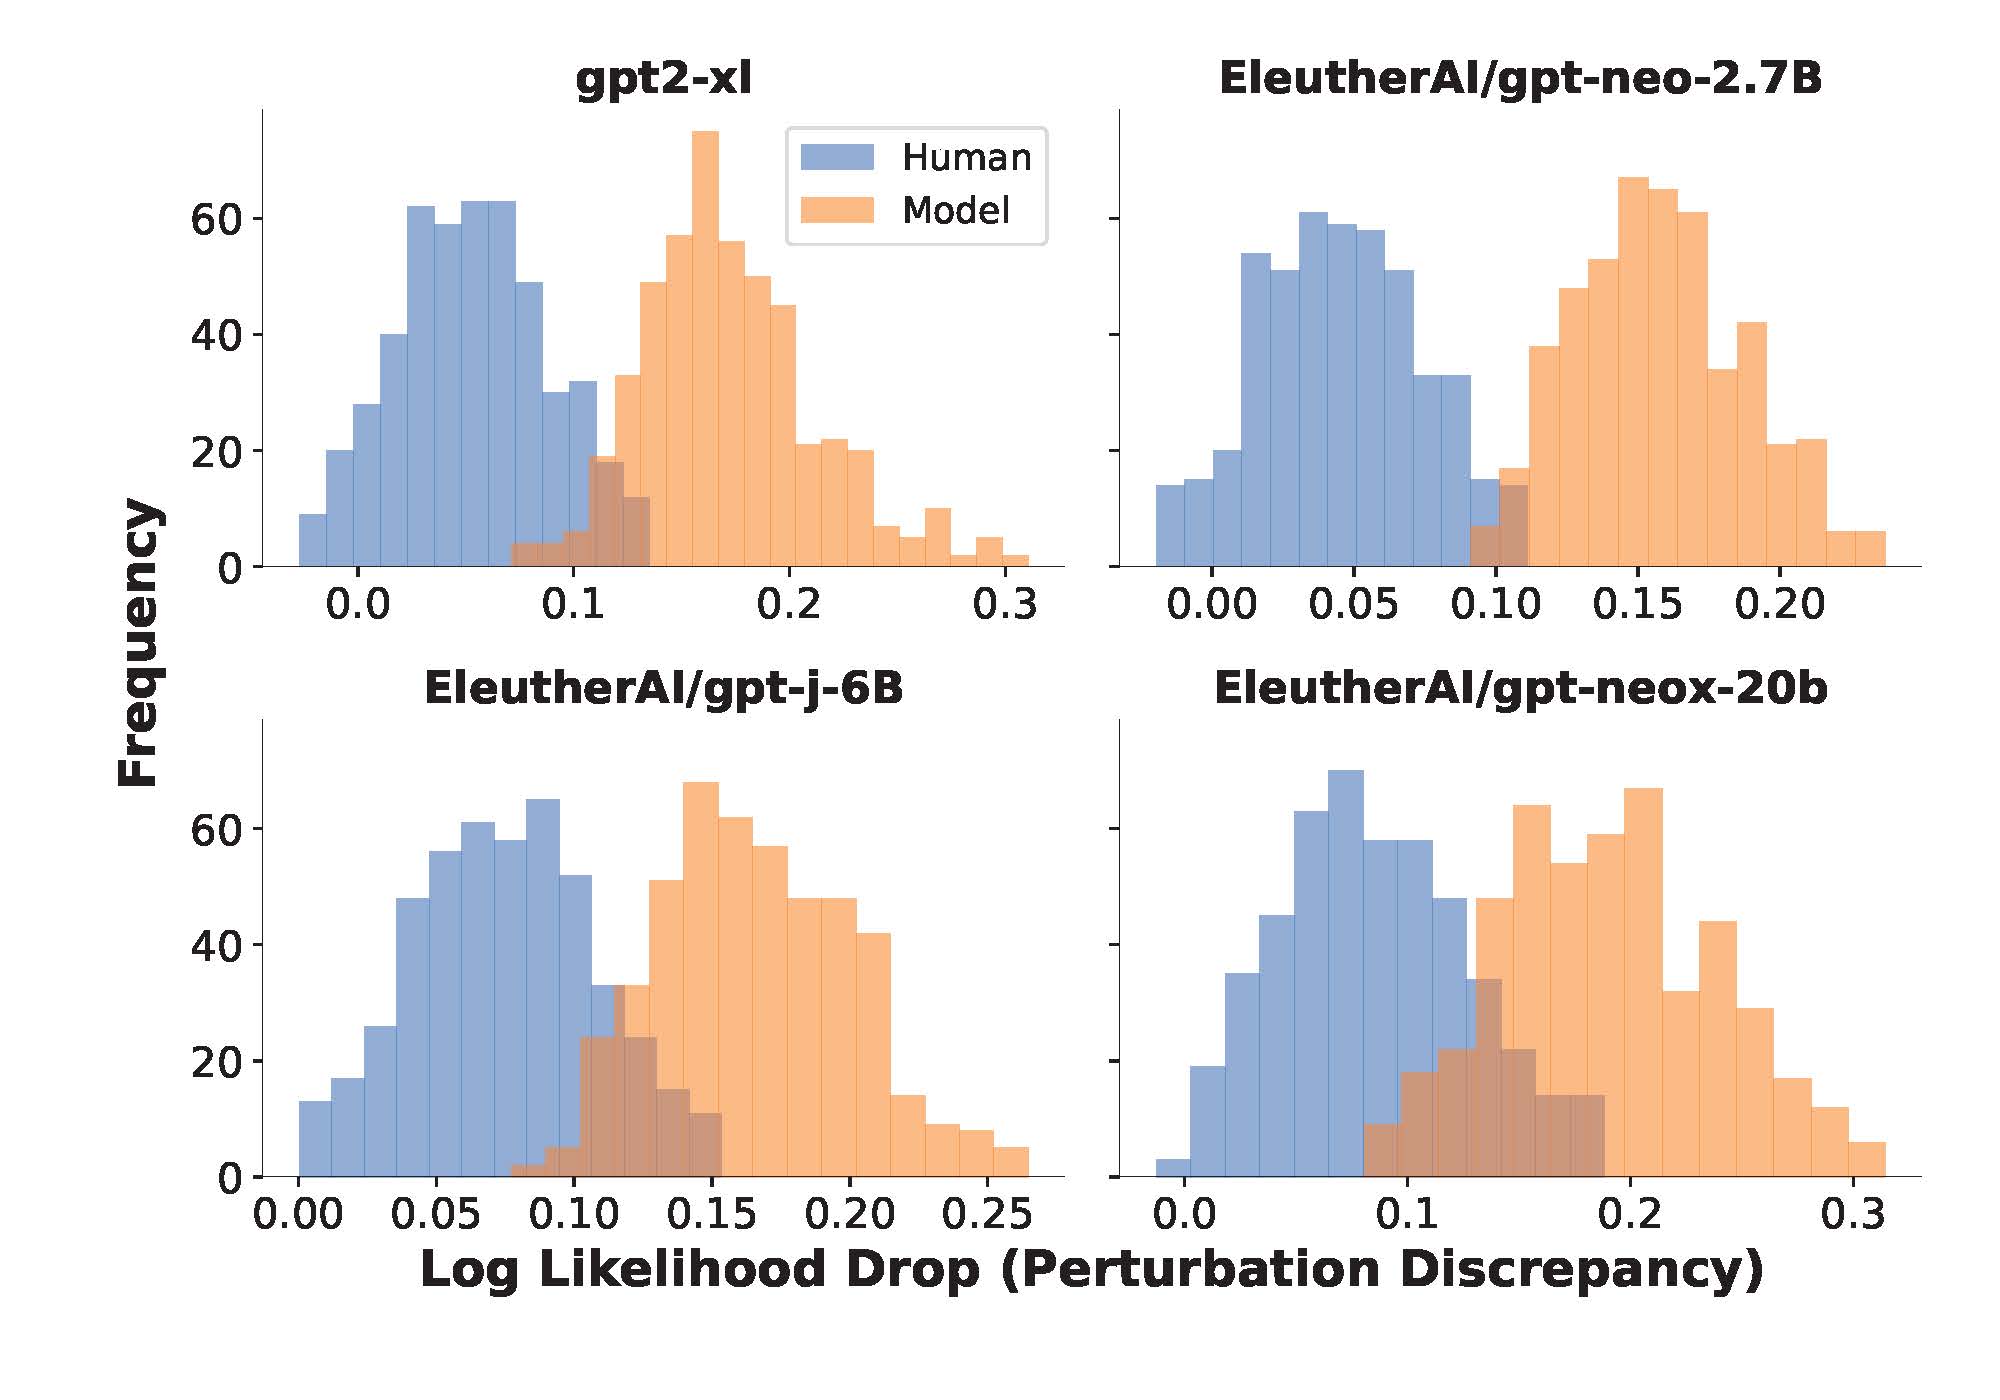 "Human Writer or AI? Scholars Build a Detection Tool; 4 graphs: Each plot shows the distribution of the perturbation discrepancy for human-written news articles and machine-generated articles. The average drop in log probability (perturbation discrepancy) after rephrasing a passage is consistently higher for model-generated passages than for human-written passages."